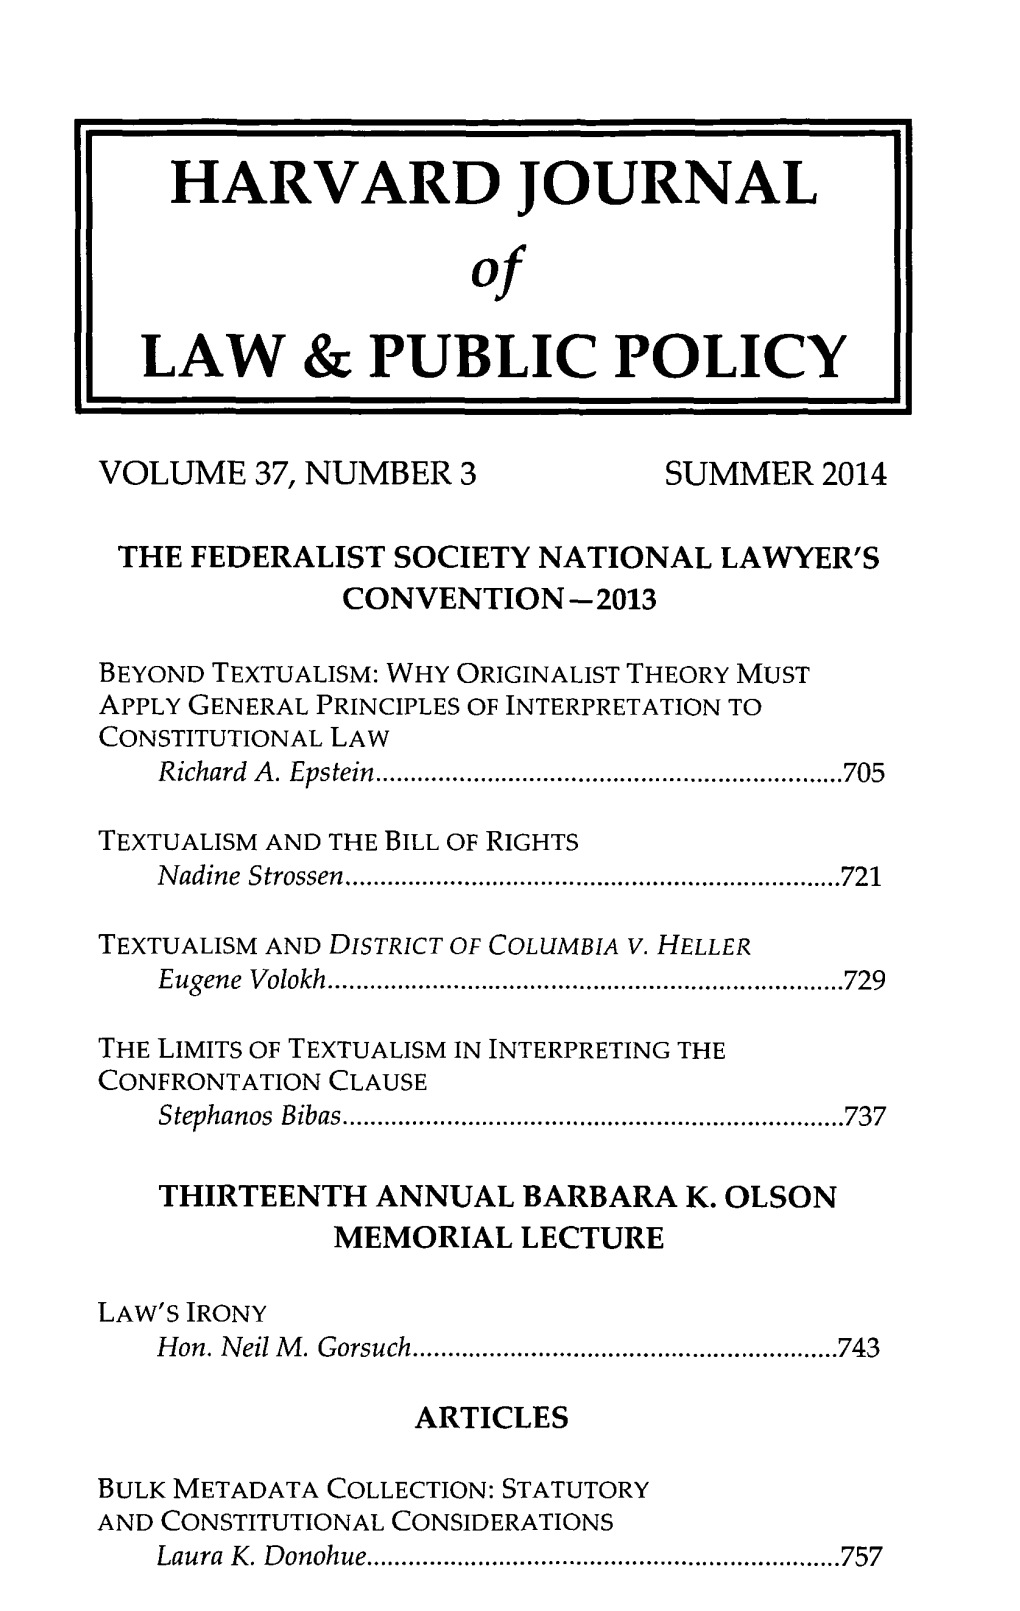 HARVARD JOURNAL of LAW & PUBLIC POLICY